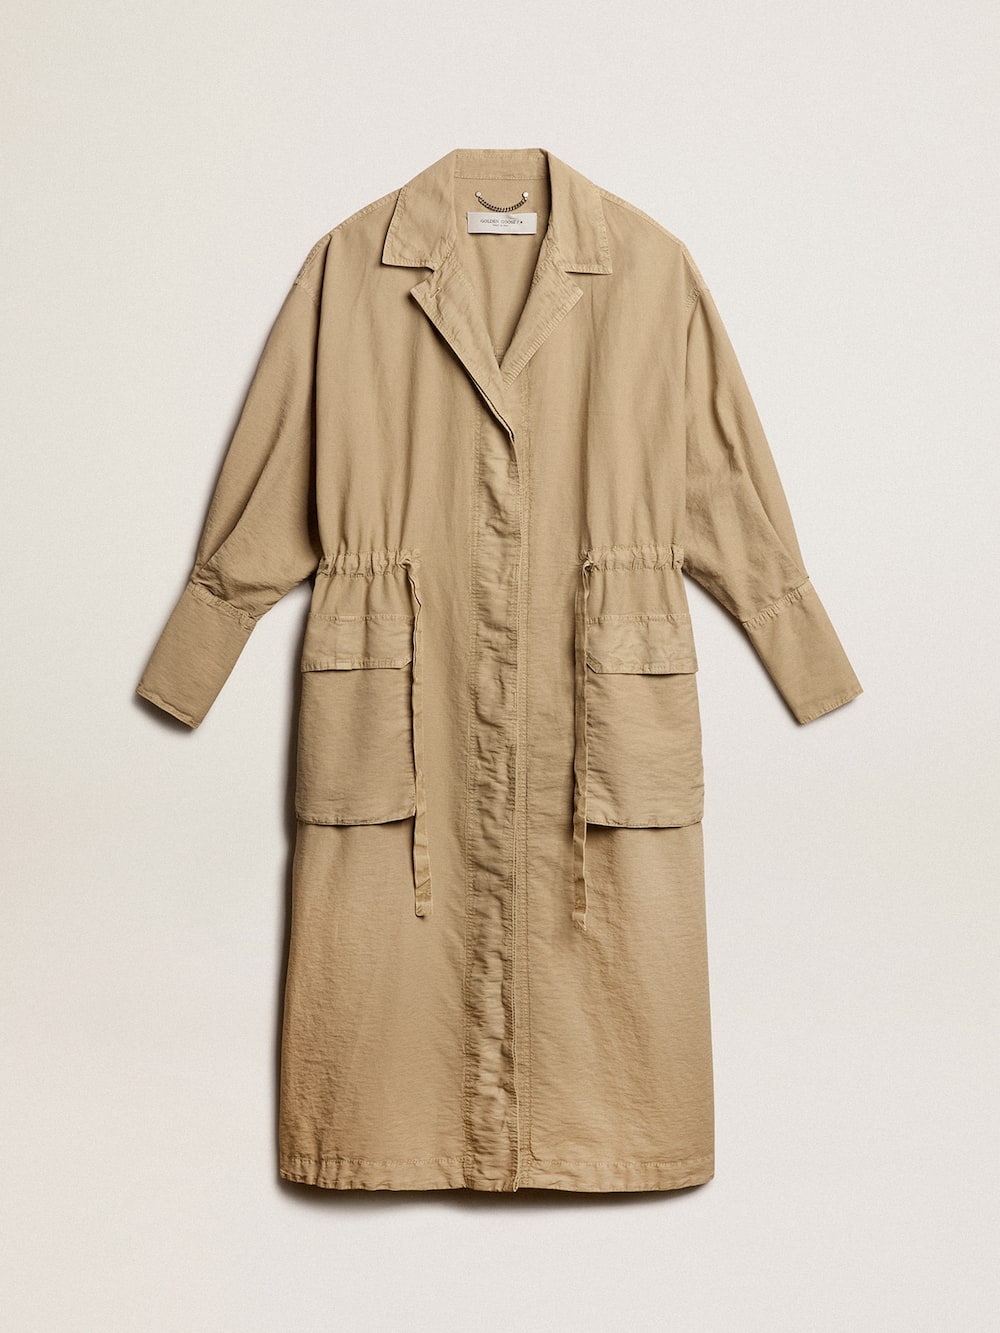 Golden Goose - Khaki-colored cotton twill trench dress in 